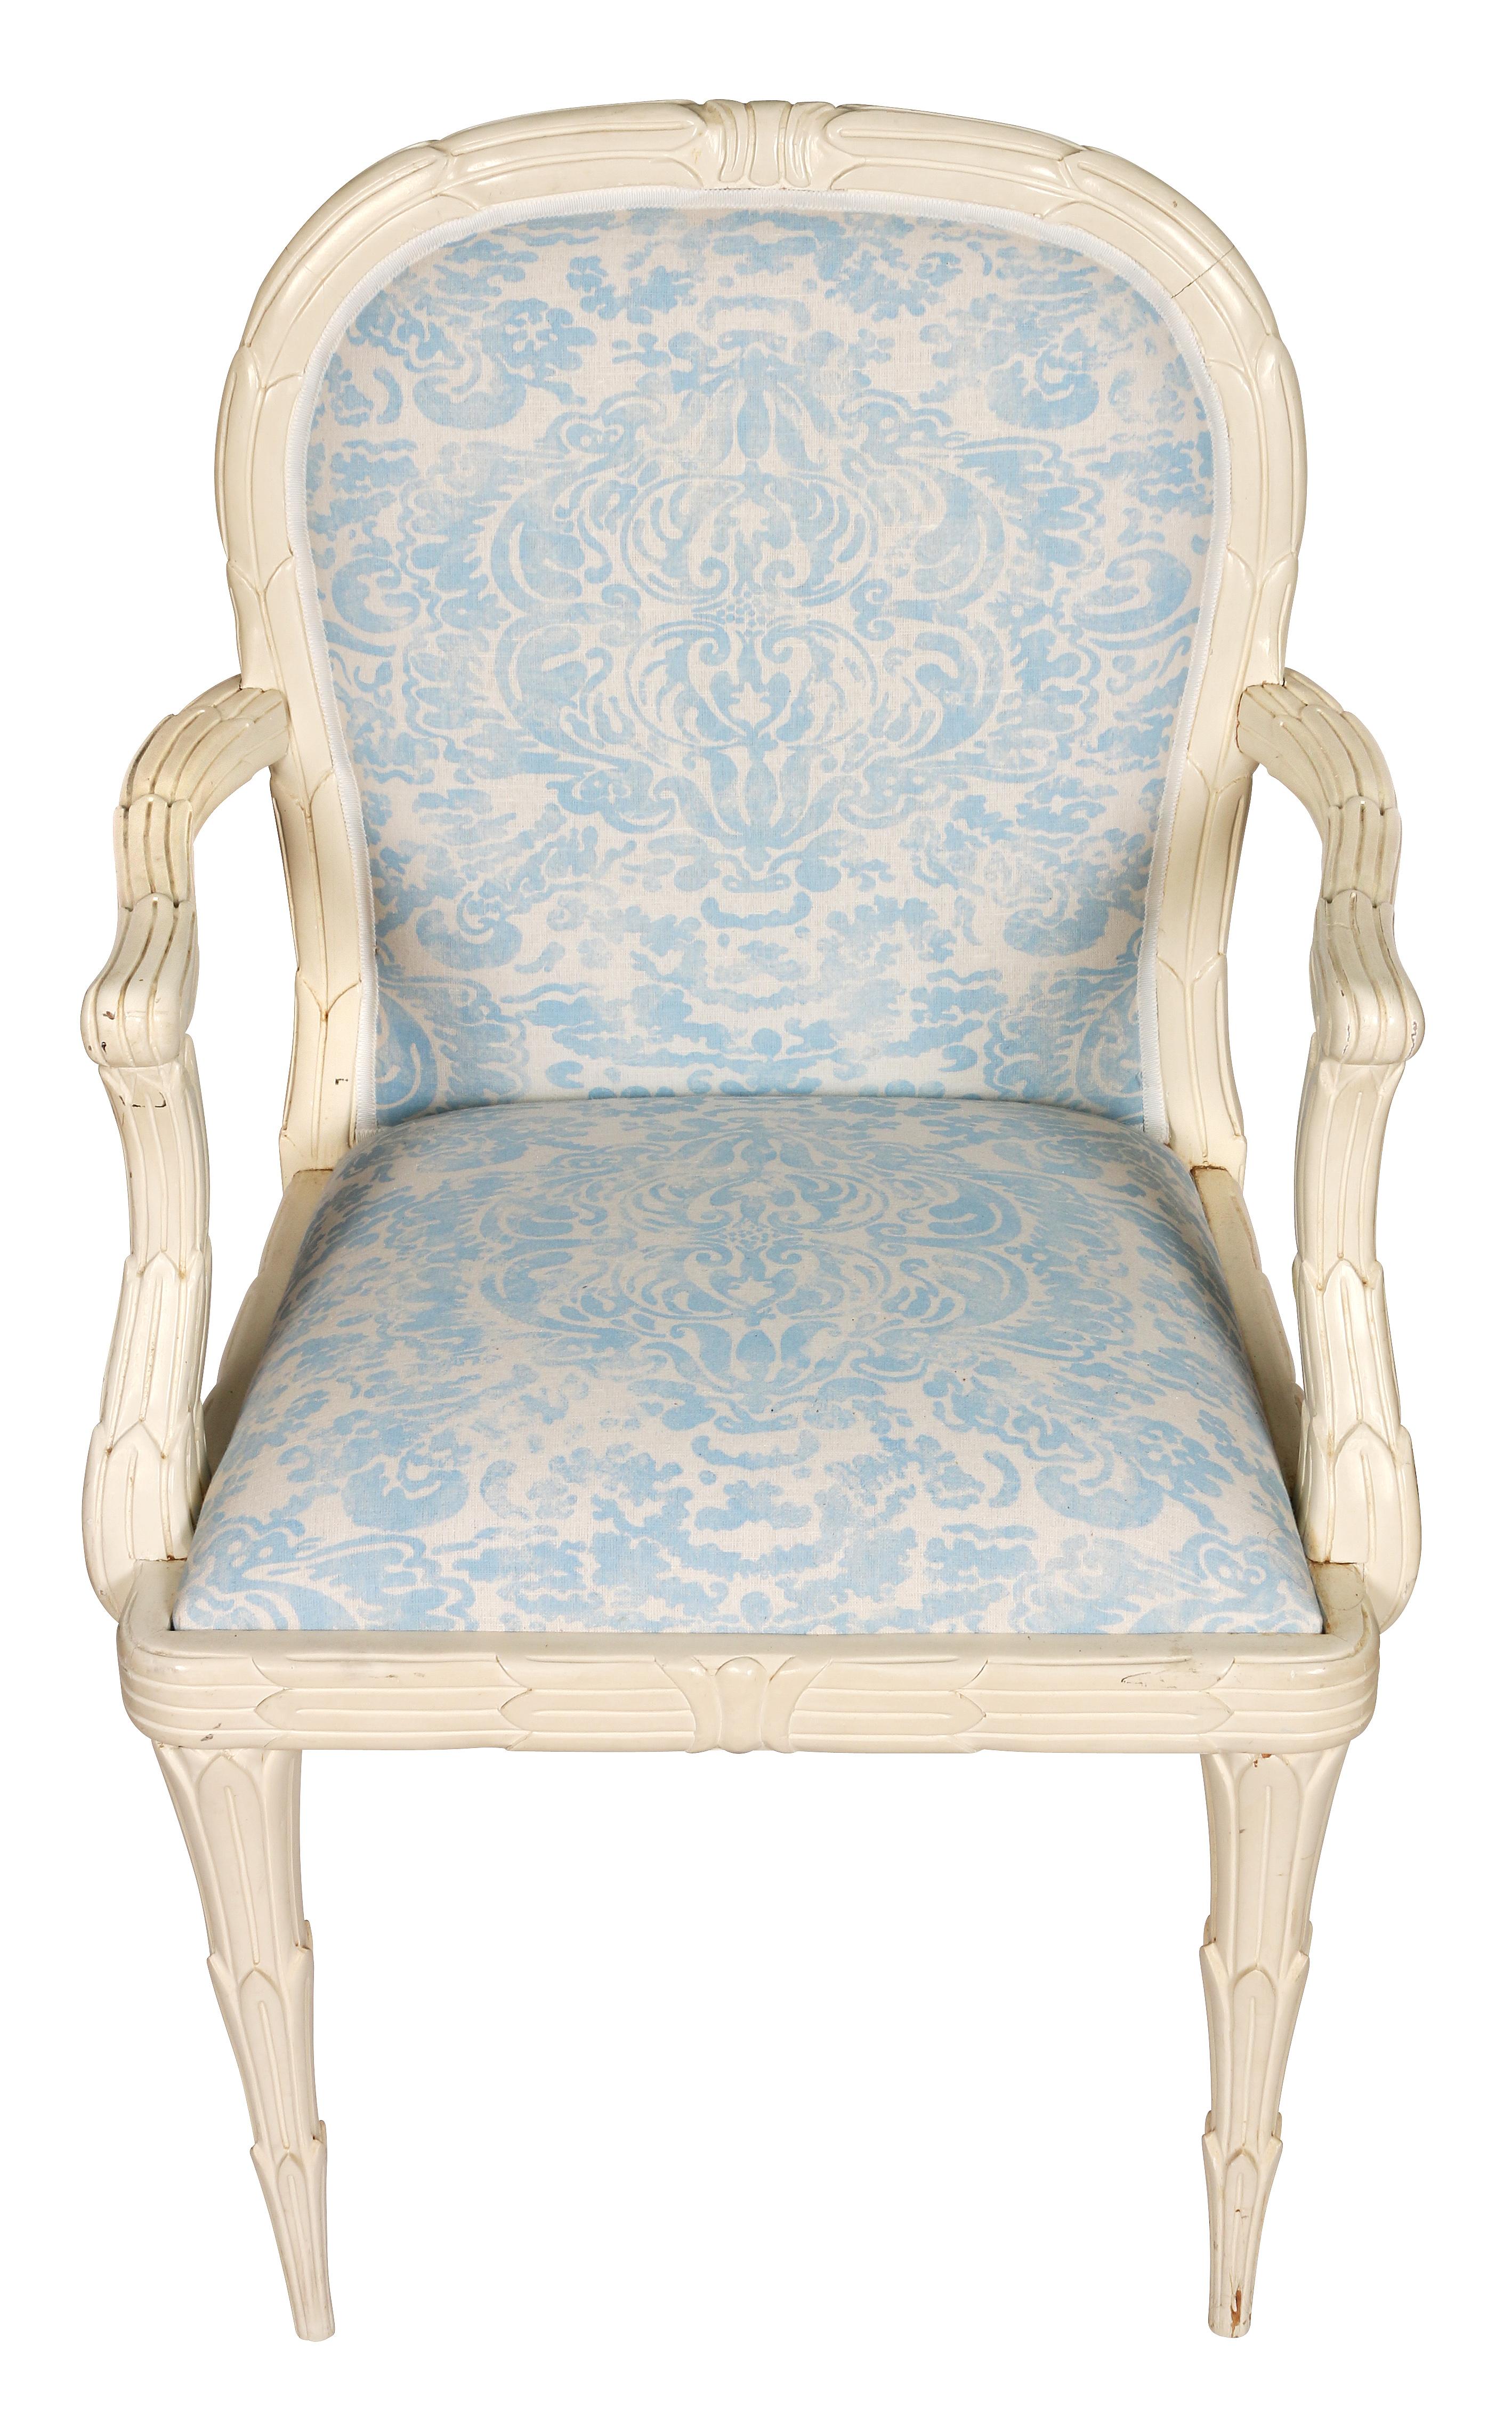 A pair of white Serge Roche armchairs recently reupholstered in China Seas pale blue floral fabric.